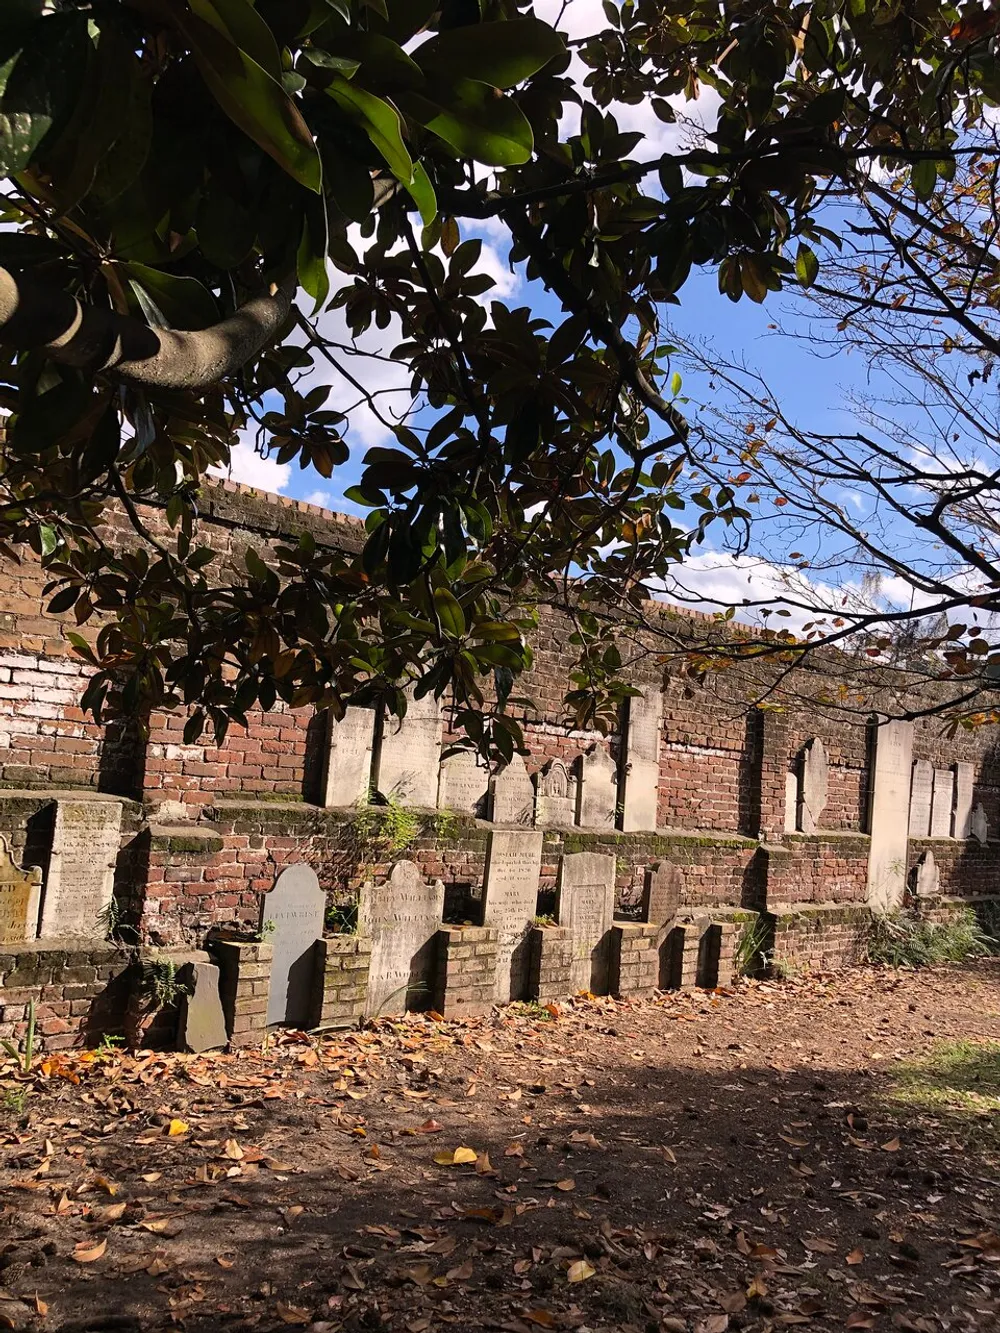 The image shows an old peaceful cemetery with weathered headstones aligned against a brick wall partly shaded by green foliage with fallen leaves scattered on the ground